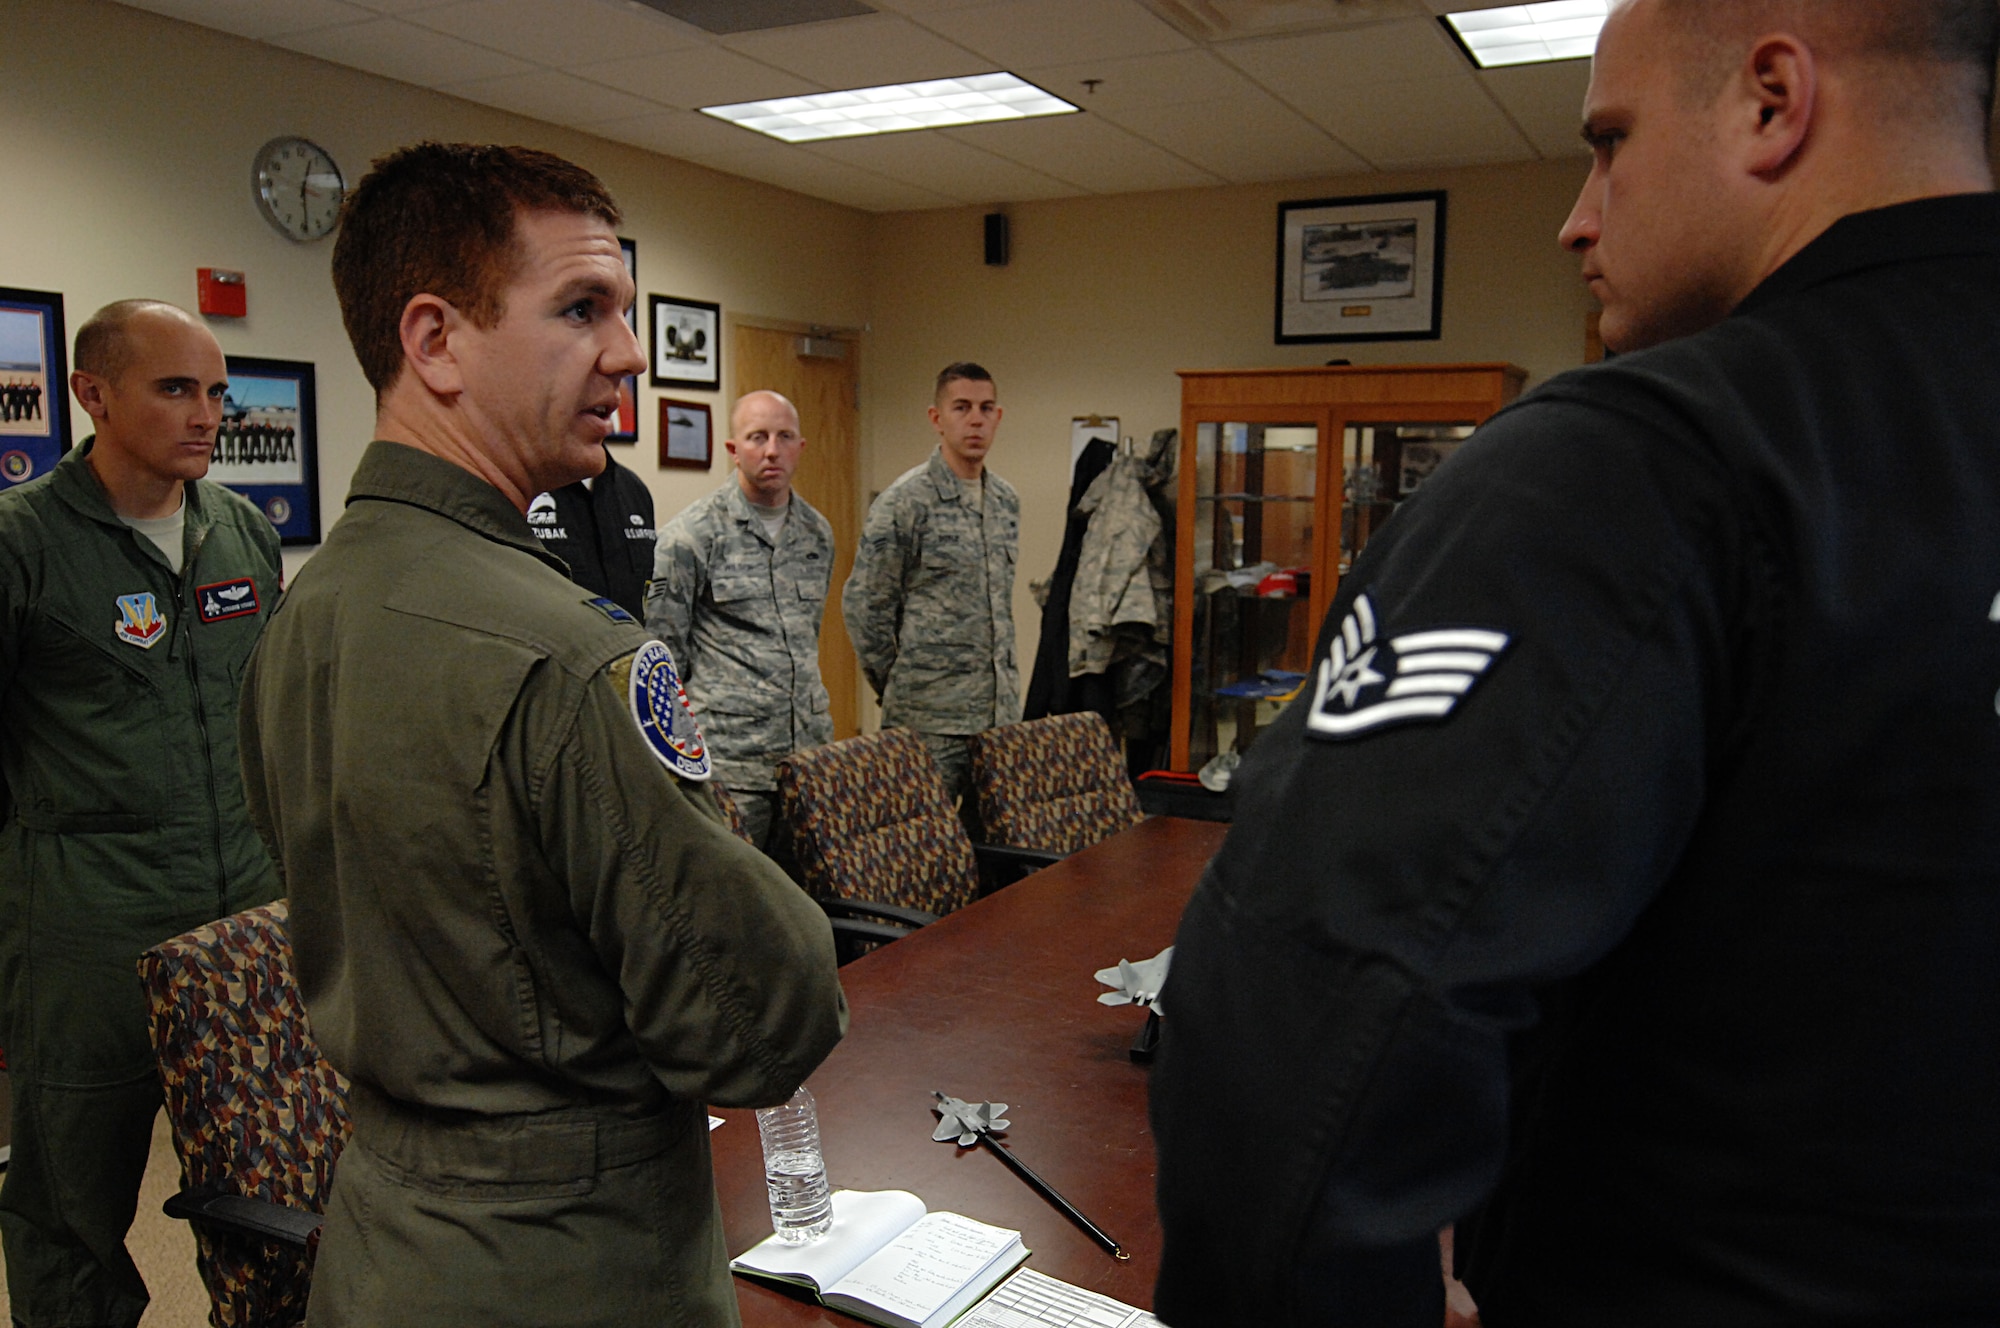 Capt. Patrick Williams, Air Force F-22 Raptor demonstration pilot, discusses his flight plan before conducting an exercise at Langley Air Force Base, Va., Nov. 30. Before every demo flight, Williams explains the routine to the team. (U.S. Air Force photo by Airman 1st Class Austin Harvill/Released)